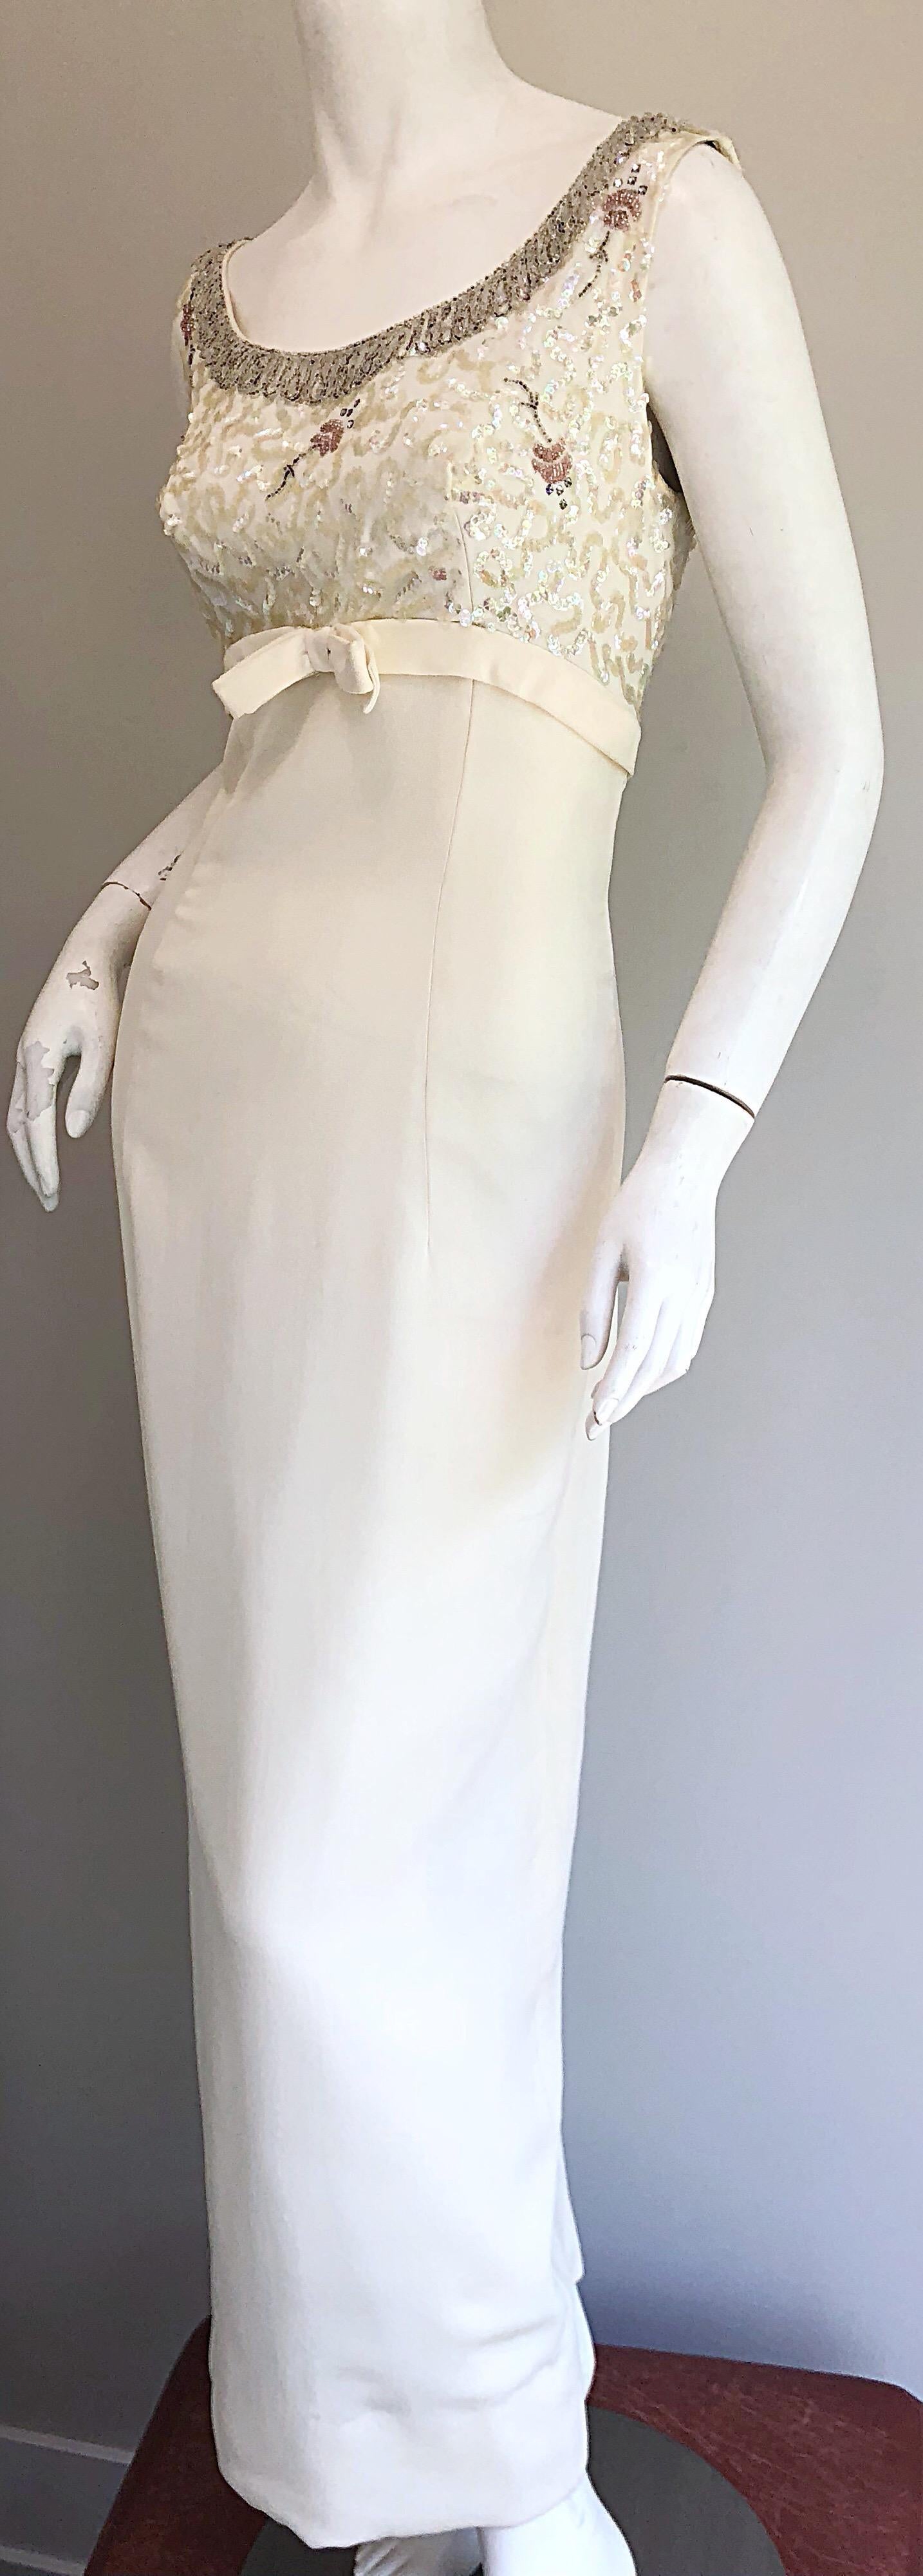 Gorgeous 1960s White Sequin Beaded Vintage Crepe 60s Evening Gown Dress 4